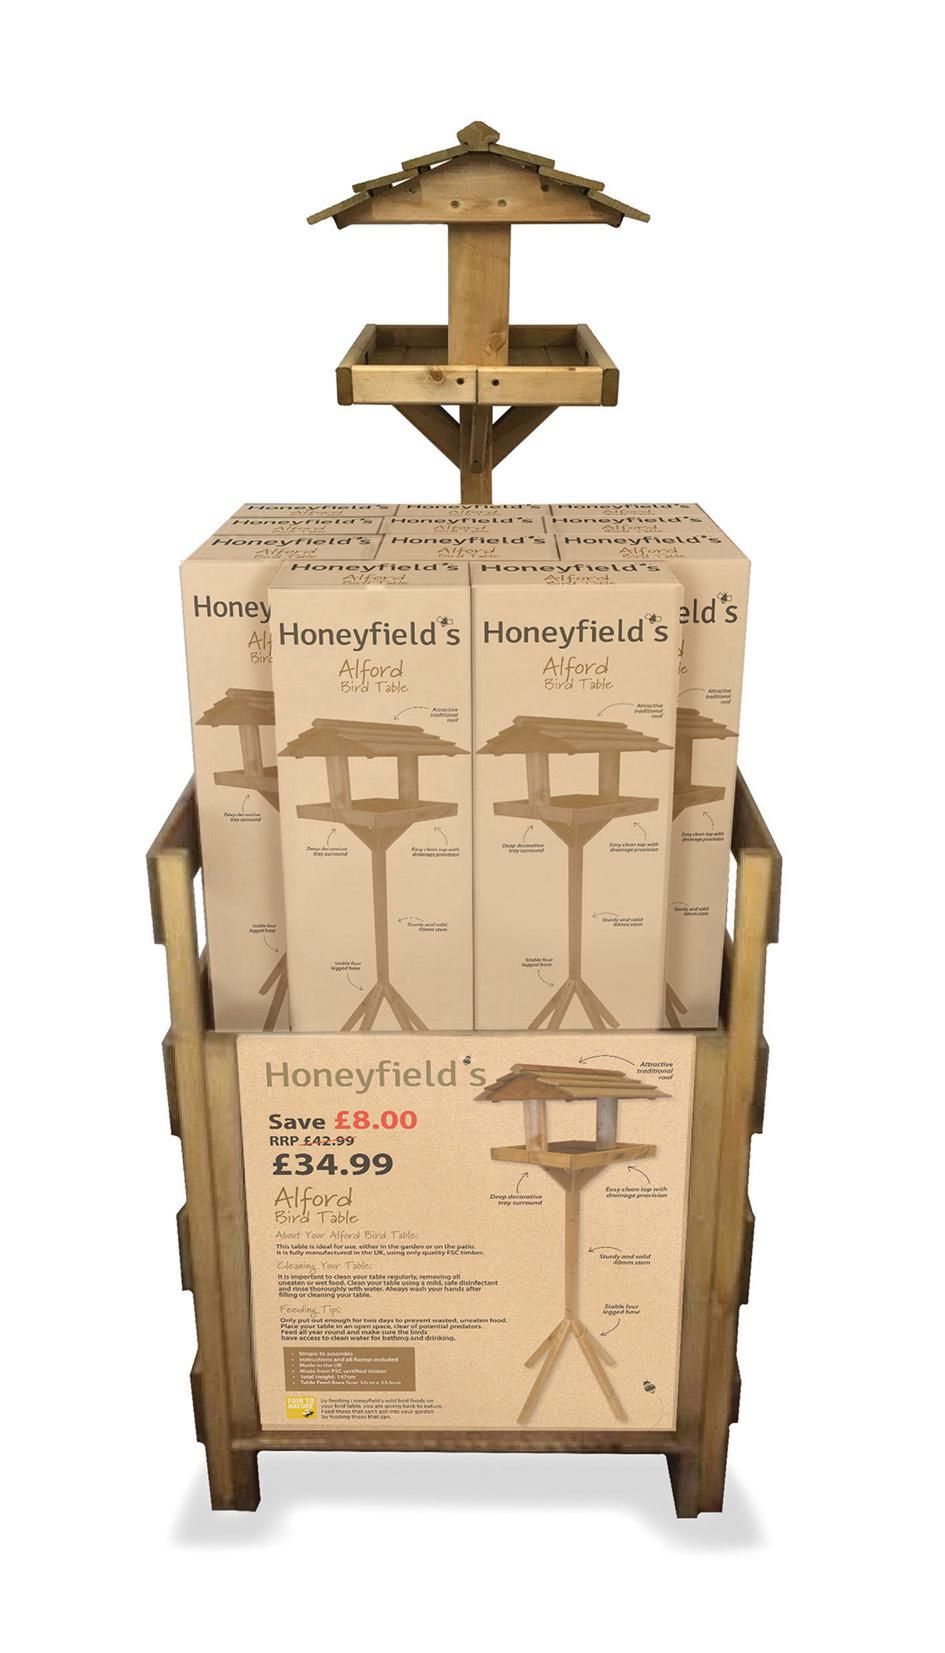 NEW Wooden Bird Tables from Honeyfield's